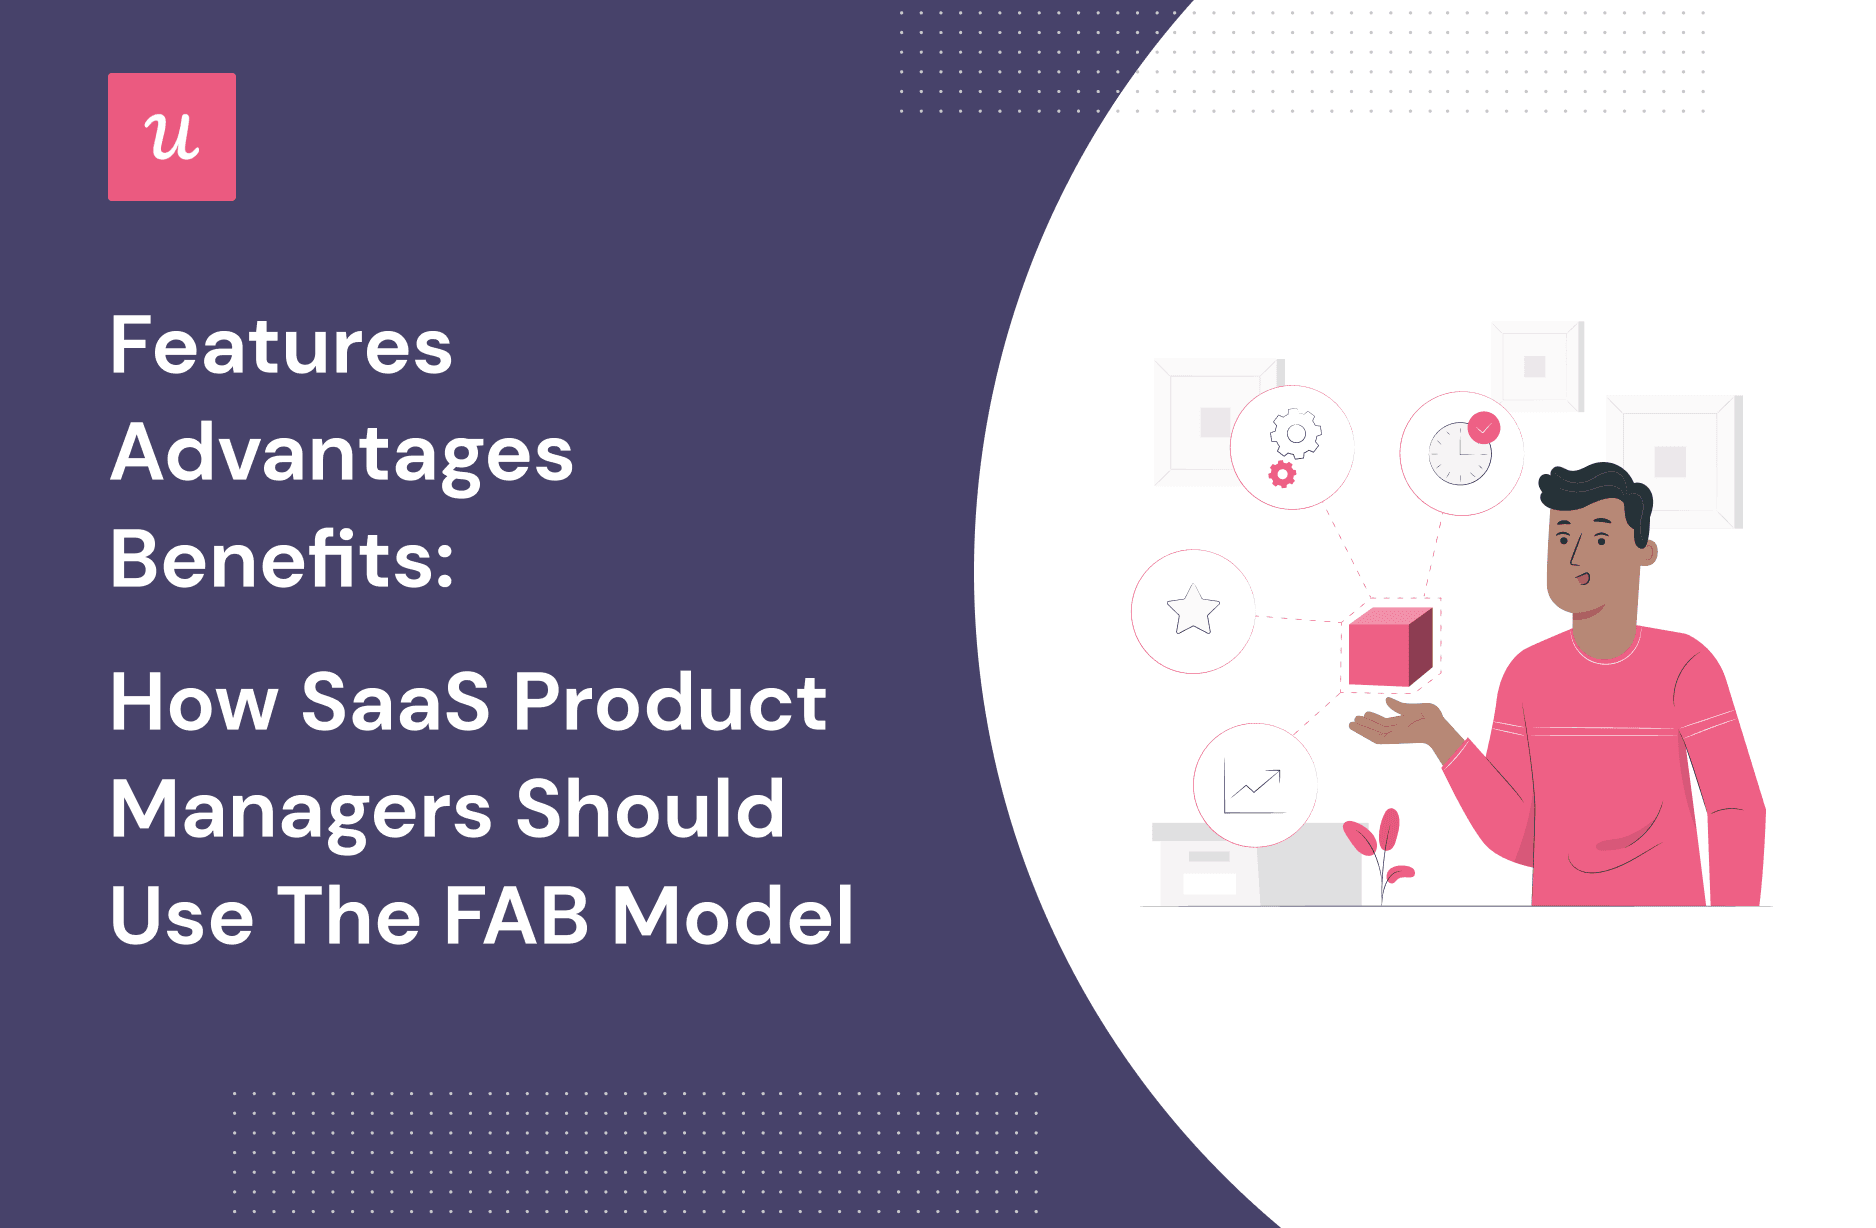 Features Advantages Benefits: How SaaS Product Managers Should Use The FAB Model cover